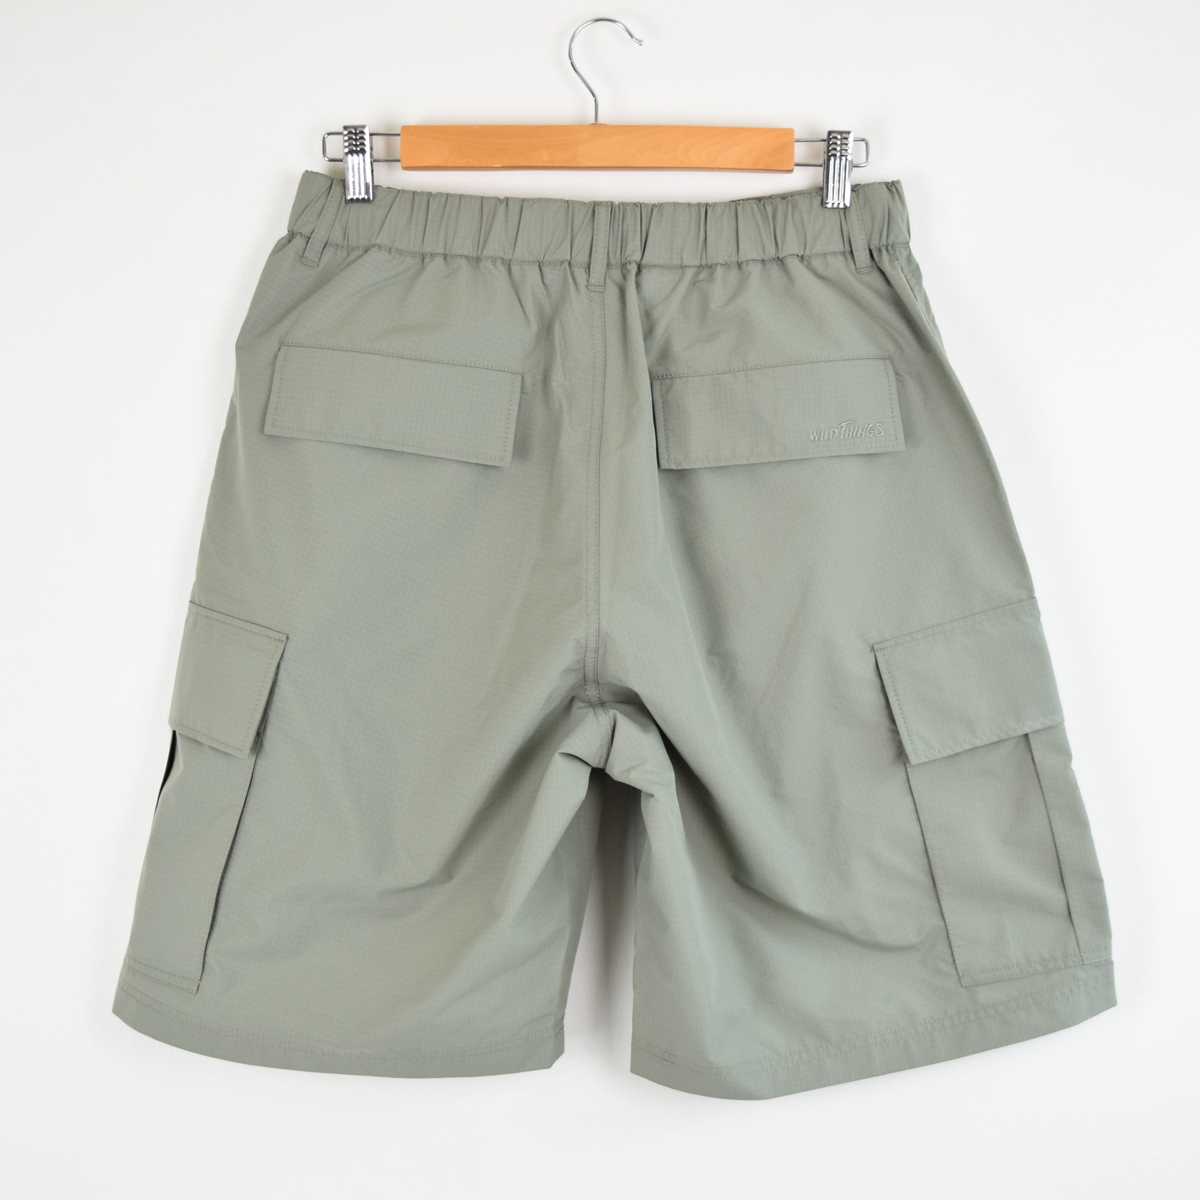  new goods regular price 1 ten thousand 6500 jpy WILD THINGS Wild Things DICROS RIP CARGO SHORT shorts shorts XL control number F619Q593